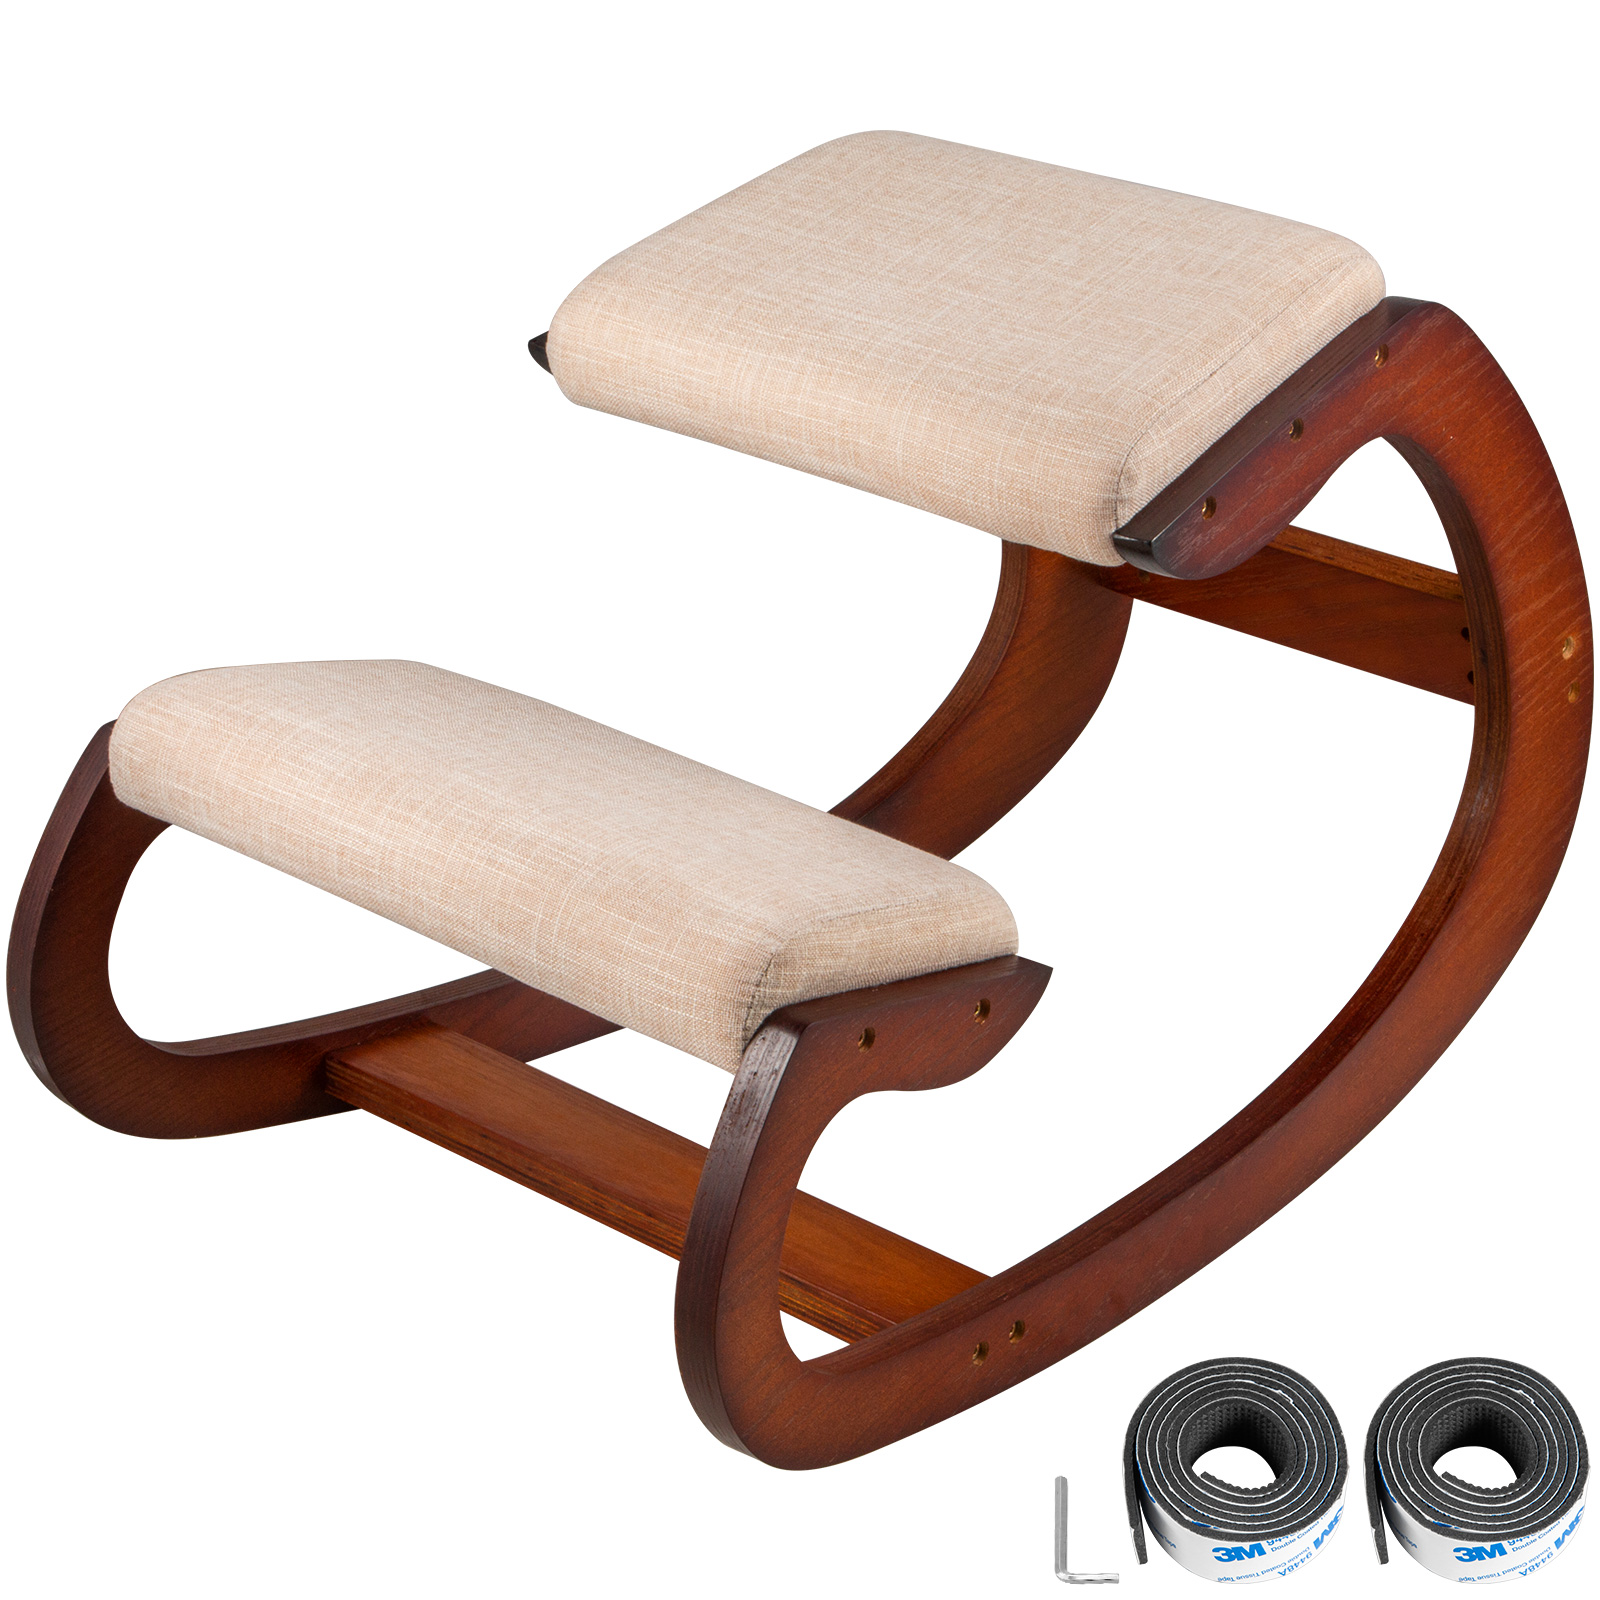 Ergonomic Kneeling Chair Wooden Neck Pain Relief Relieve Fatigue Wood Stool от Vevor Many GEOs